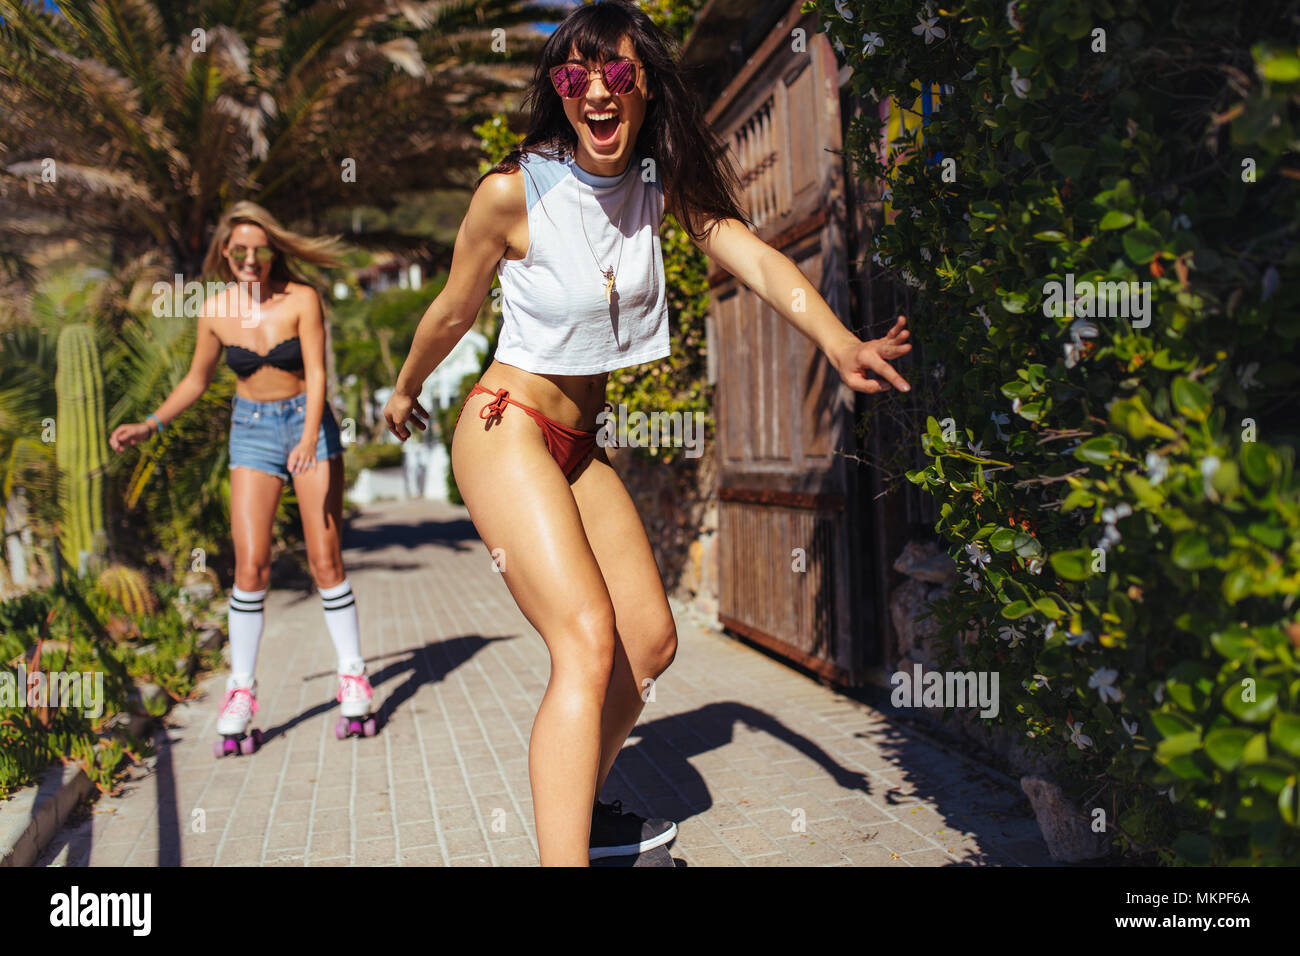 Smiling woman skating during a summer vacation with female friend at the back. Female friends doing skateboarding on the beach. Stock Photo